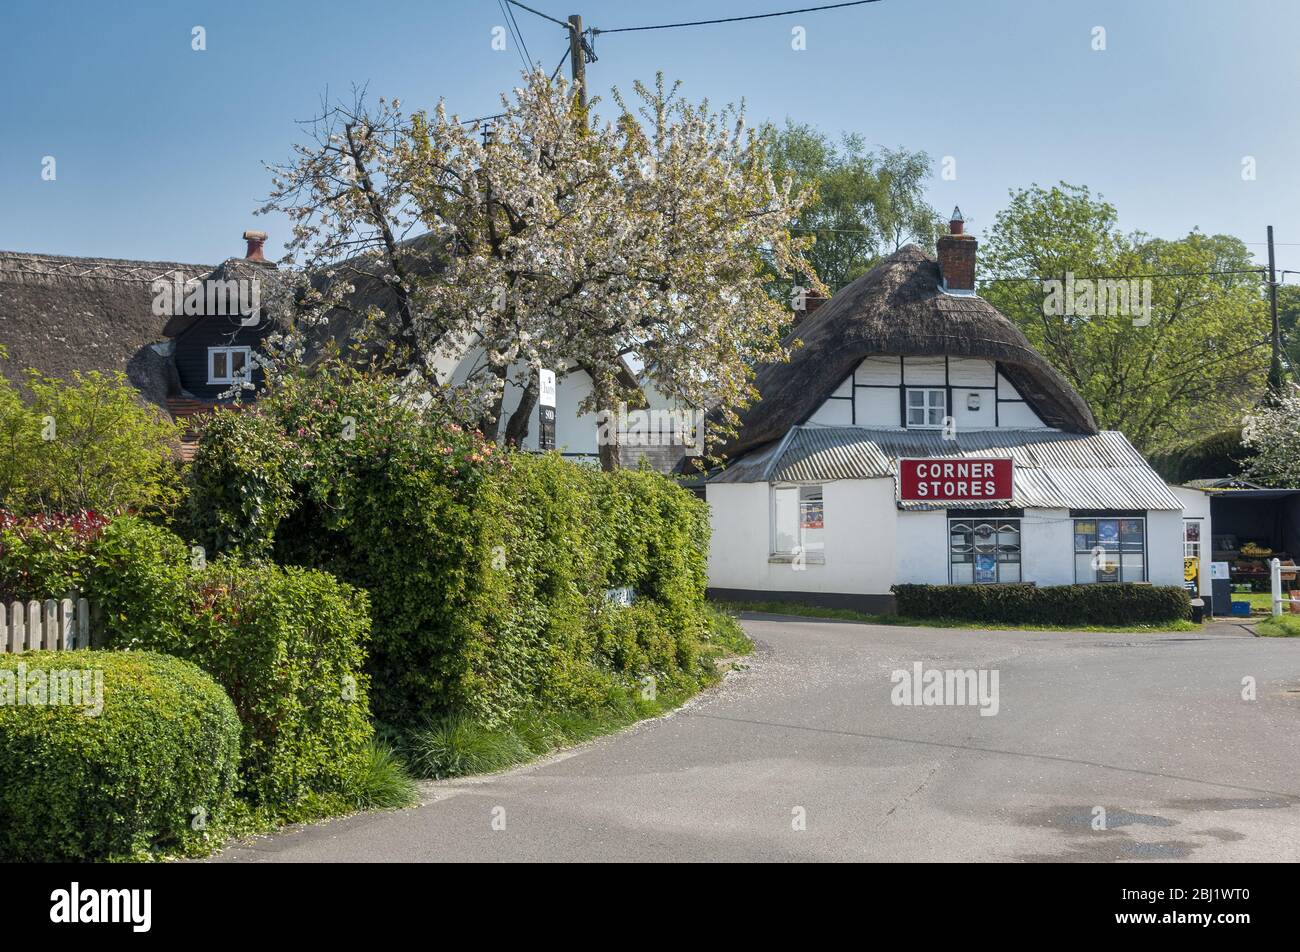 Rustic thatched cottages and the local corner store in the rural village of Kings Somborne near Stockbridge in Hampshire, England, UK Stock Photo